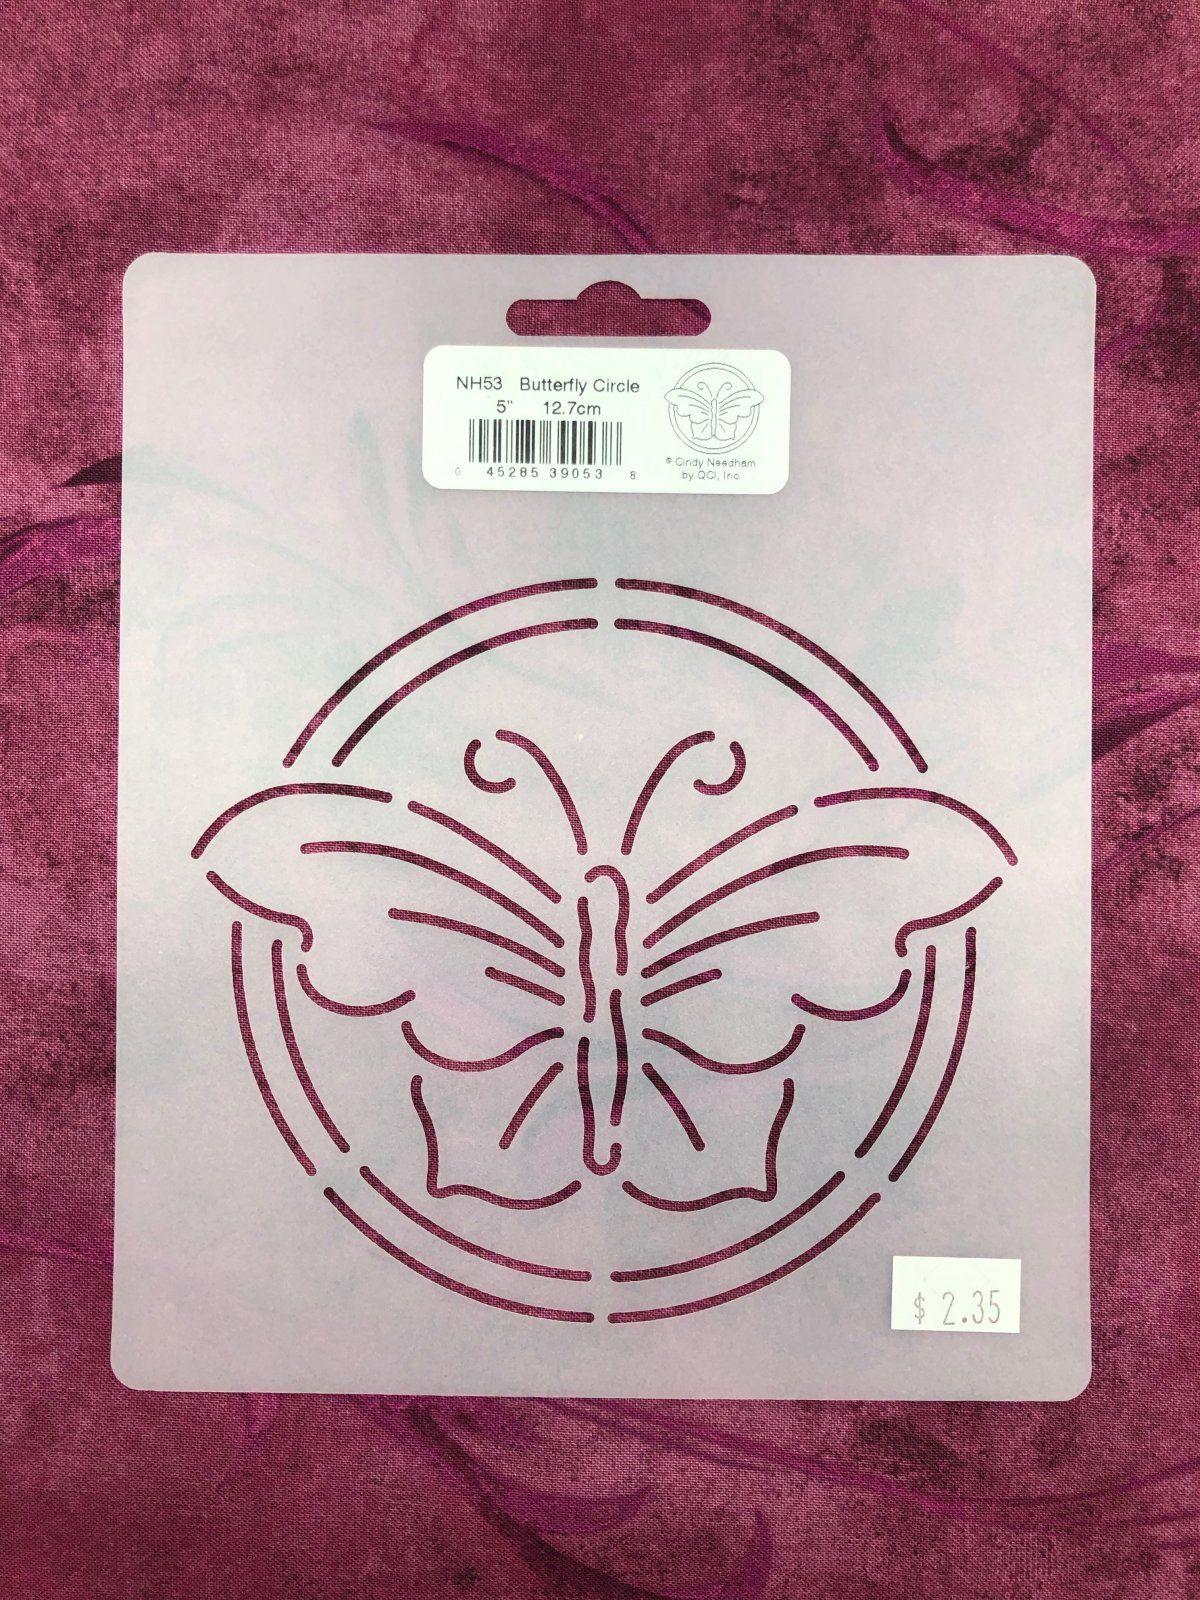 Butterfly Circle Logo - NH53 Butterfly Circle 5 Inch Stencil - 045285390538